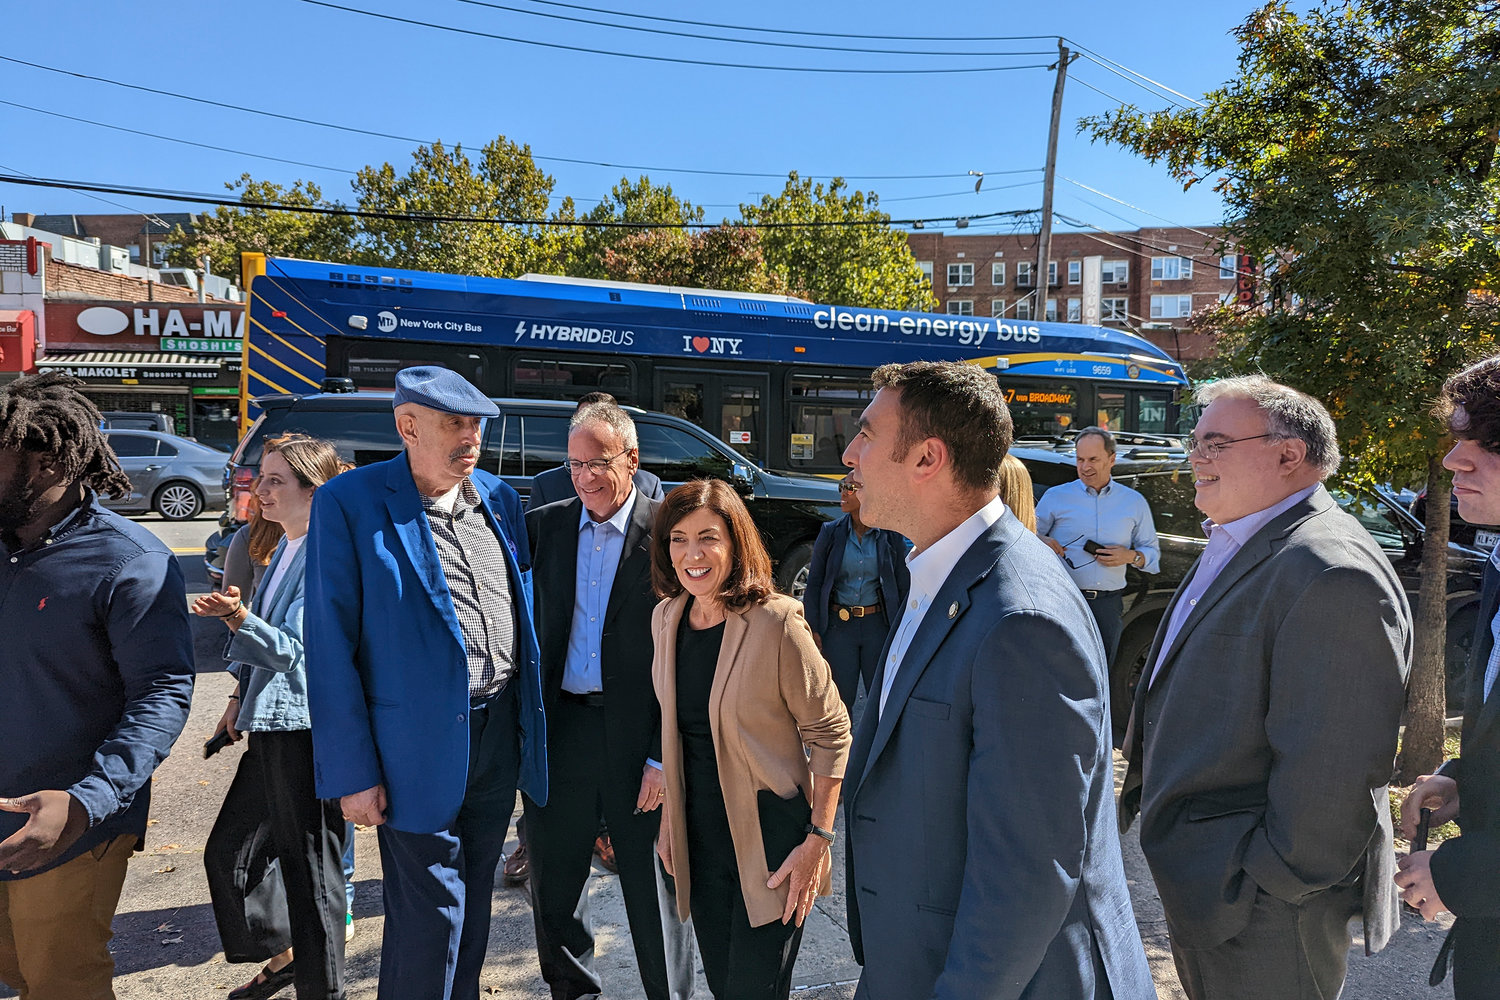 Gov. Kathy Hochul stopped by Riverdale on her Saturday tour of the Bronx. Hochul has a sizable lead over her Republican opponent, Republican Lee Zeldin, according to recent polling.